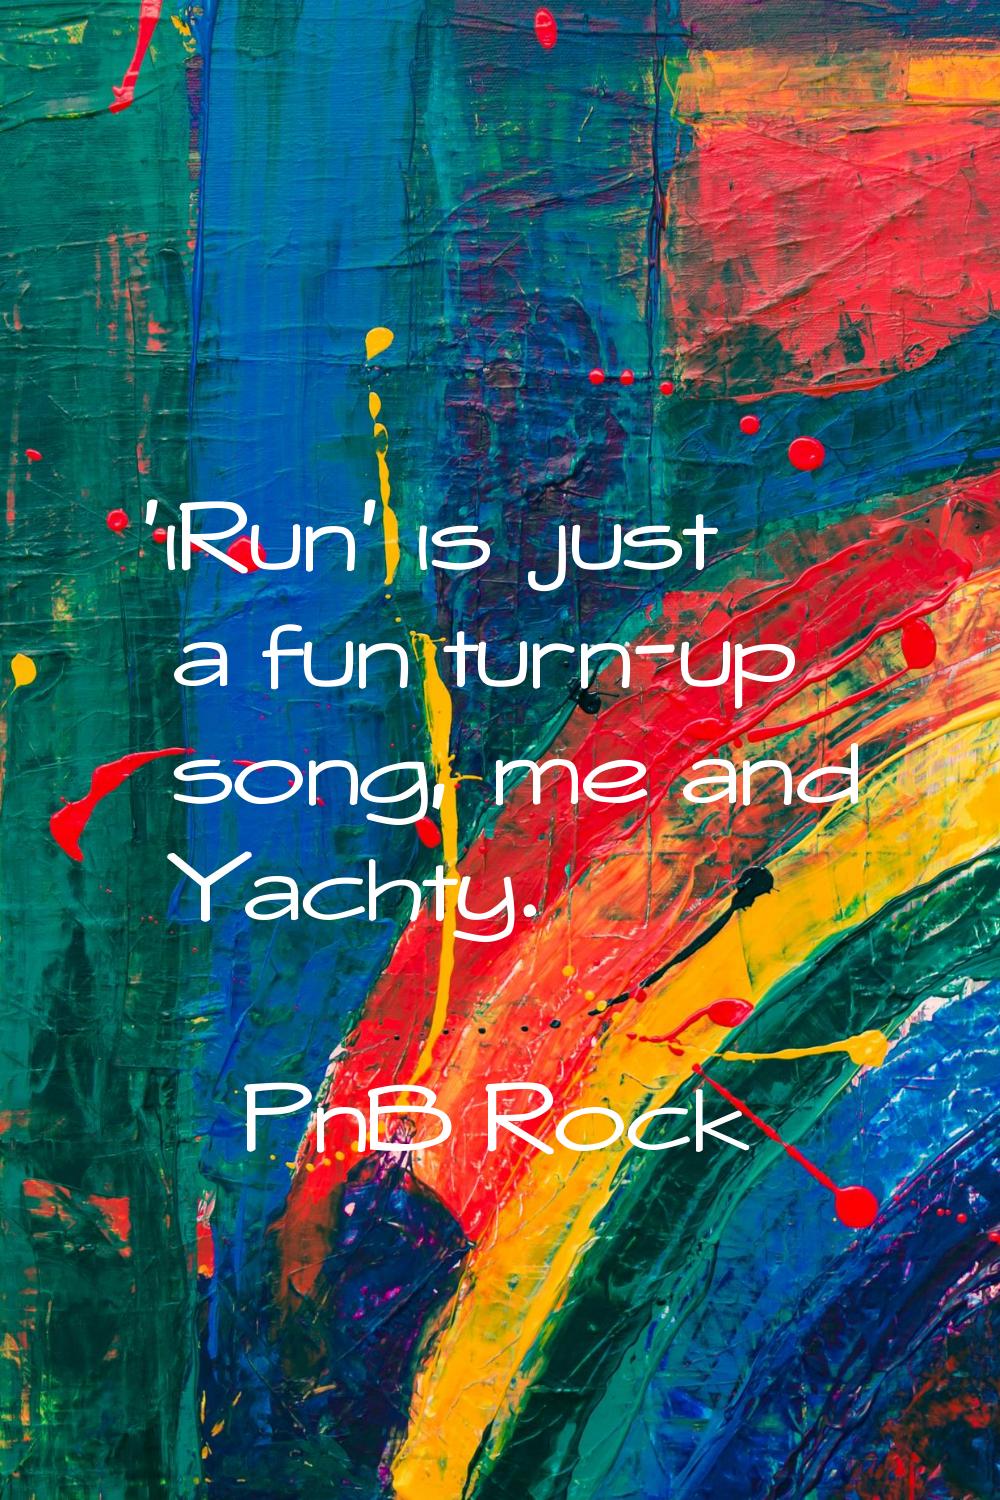 'iRun' is just a fun turn-up song, me and Yachty.